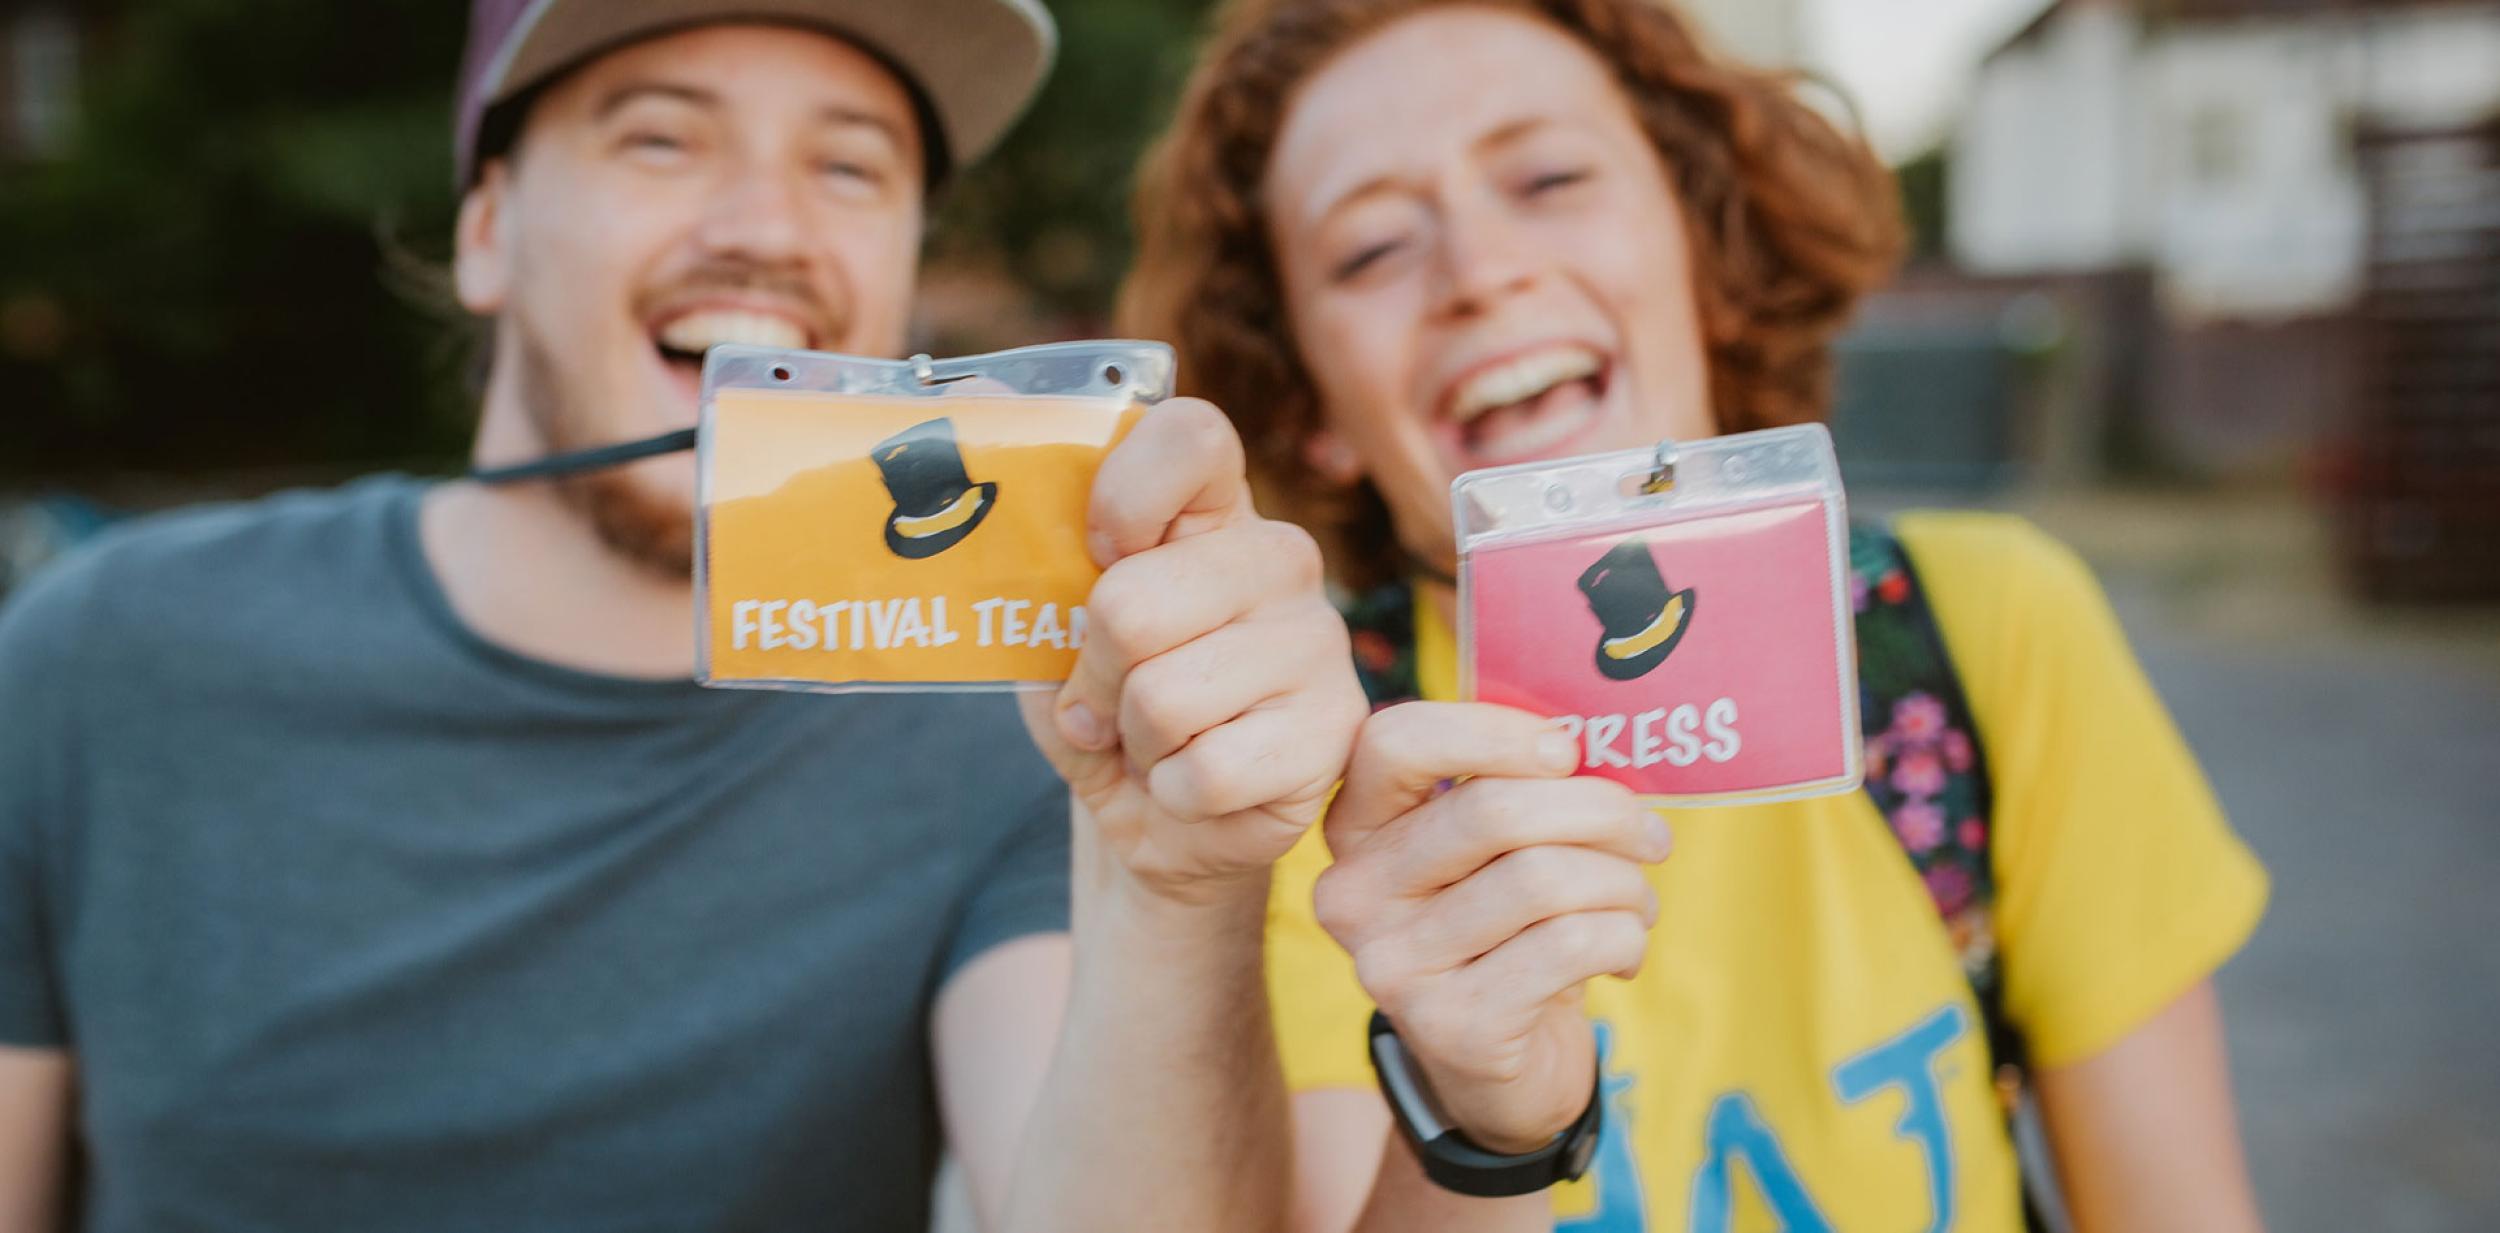 Two smiling people holding press passes up to the camera